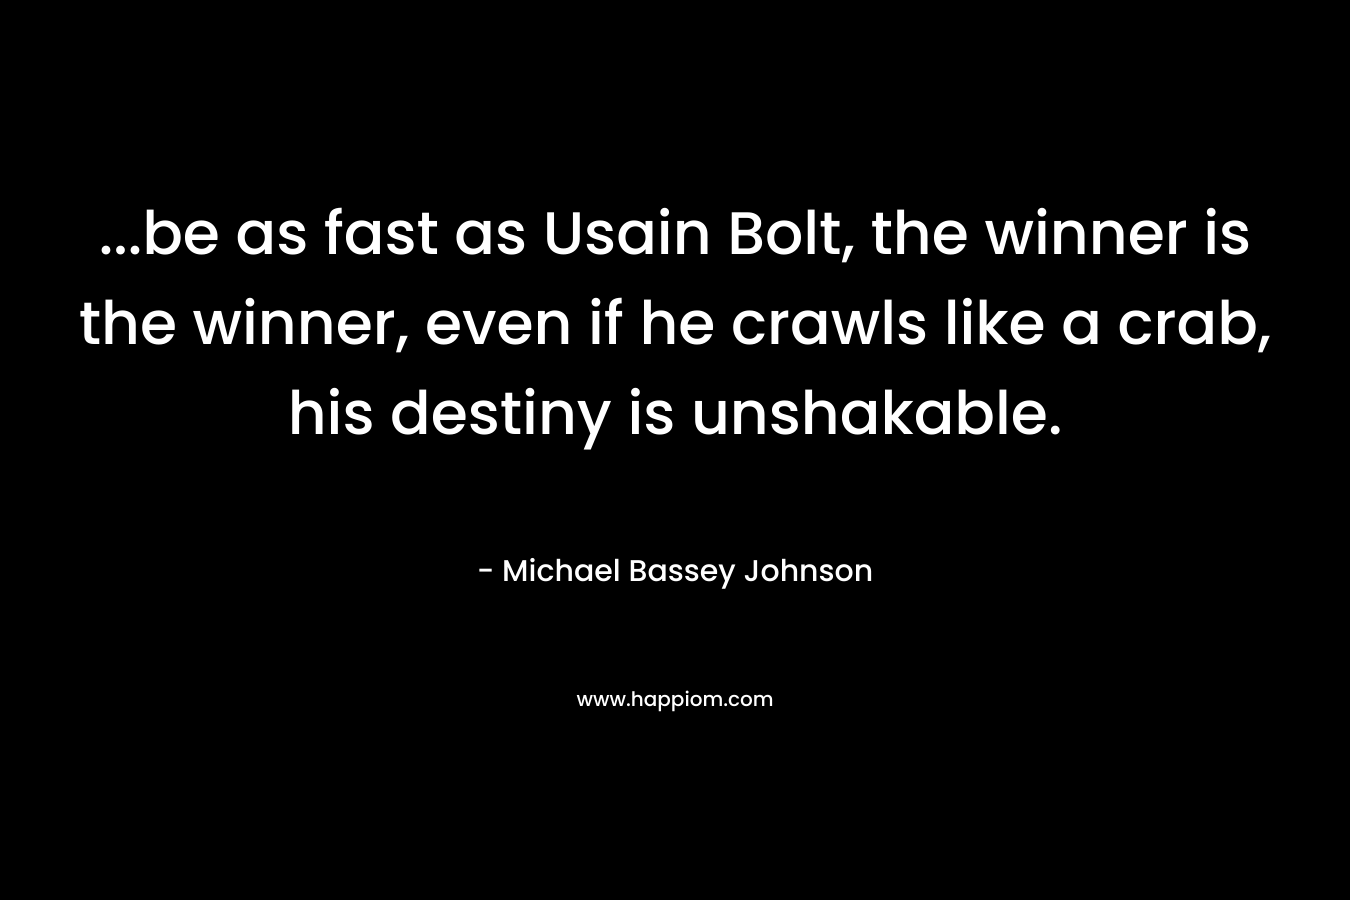 ...be as fast as Usain Bolt, the winner is the winner, even if he crawls like a crab, his destiny is unshakable.